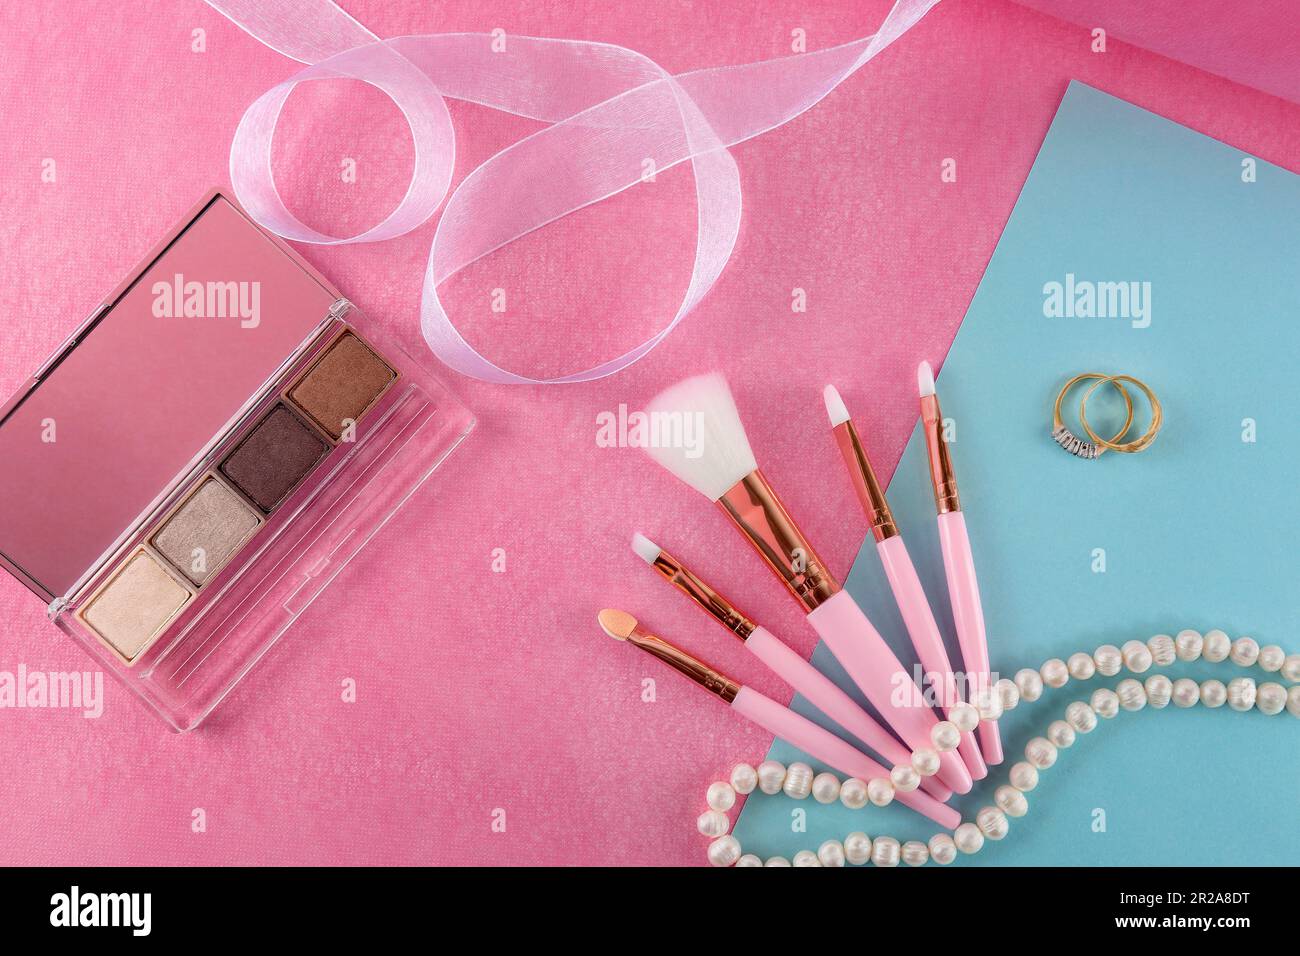 Beautiful still life of cosmetics, accessories and jewelry lying on a pink background. Stock Photo